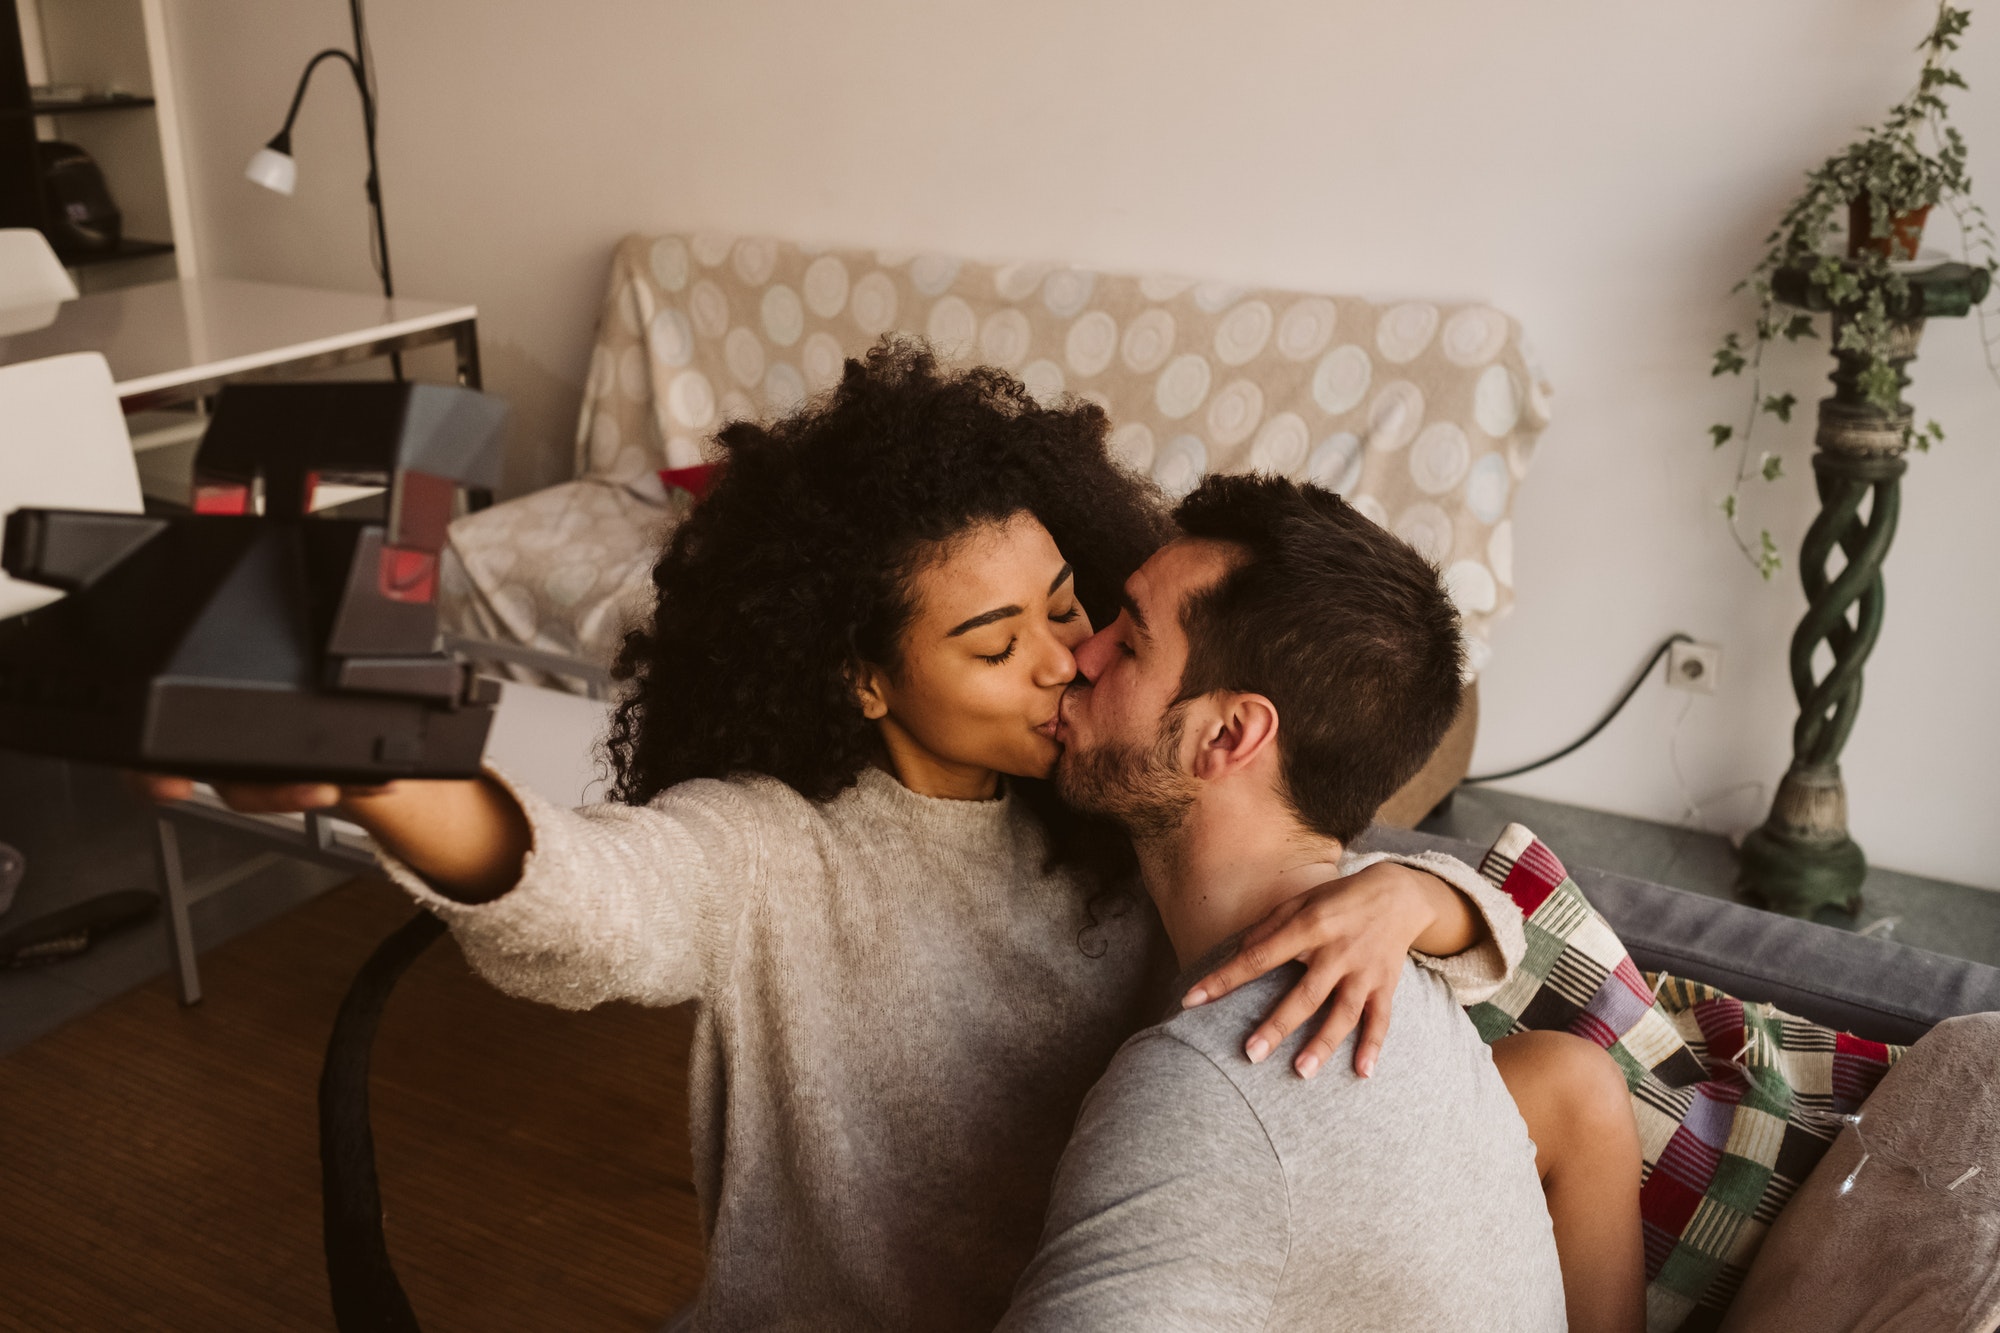 The Art of Intimacy: Creating Connection